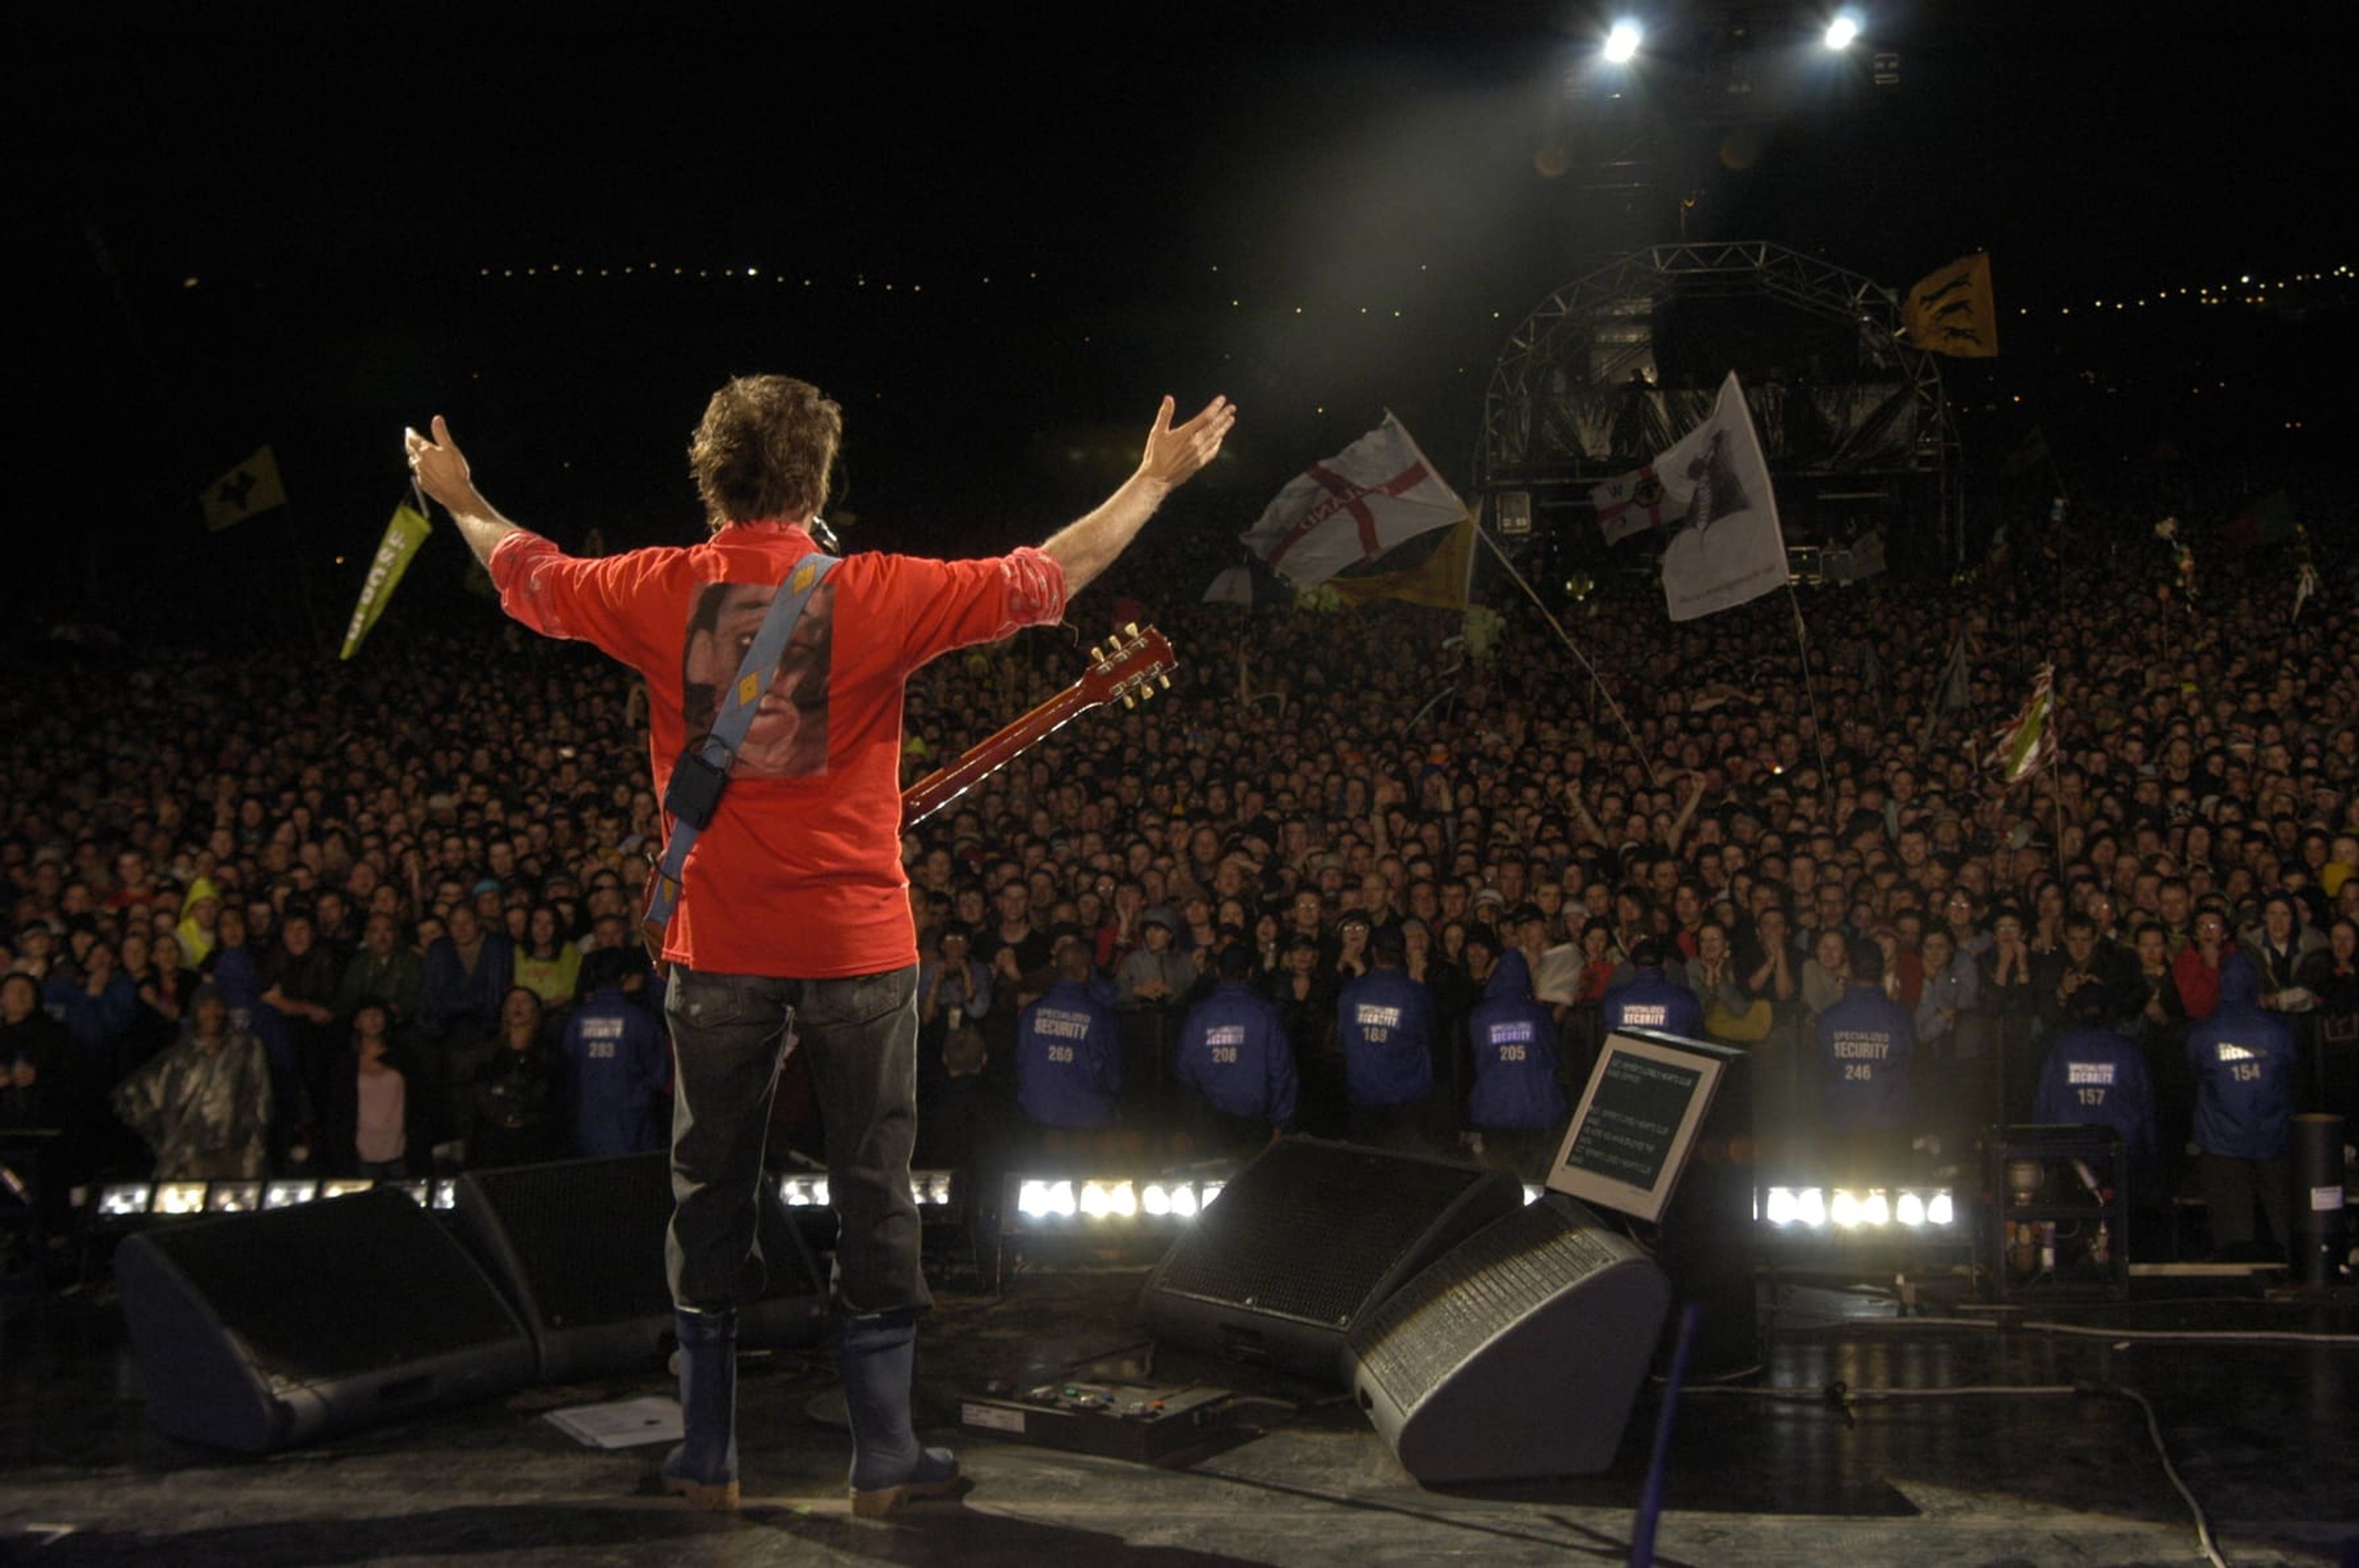 Paul standing in front of a crowd with his arms outstretched